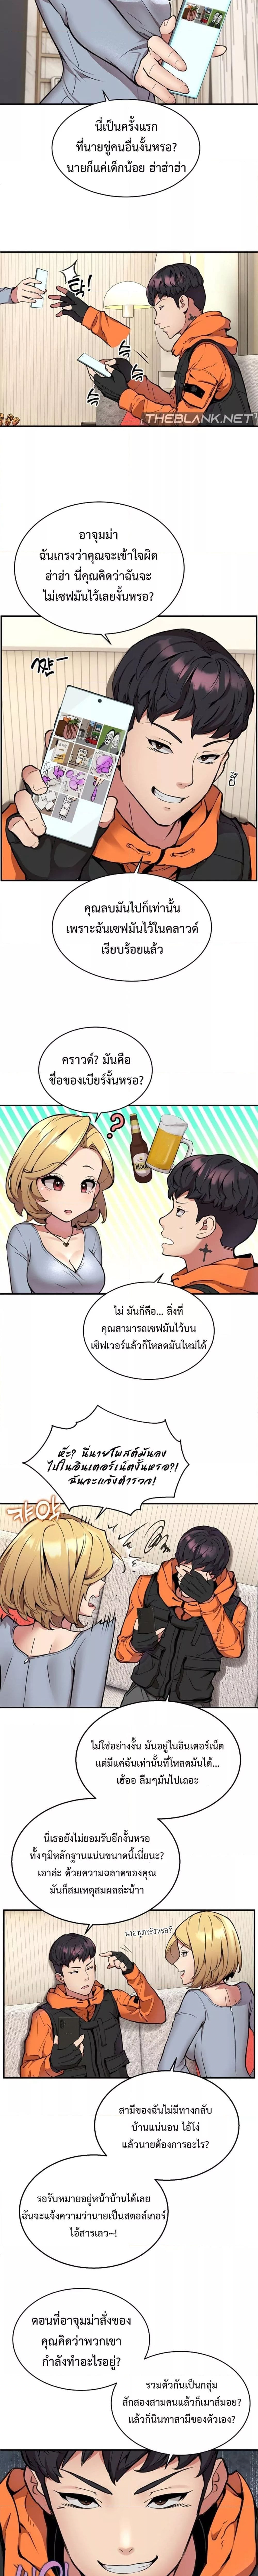 Driver in the New City ตอนที่ 2 ภาพ 7